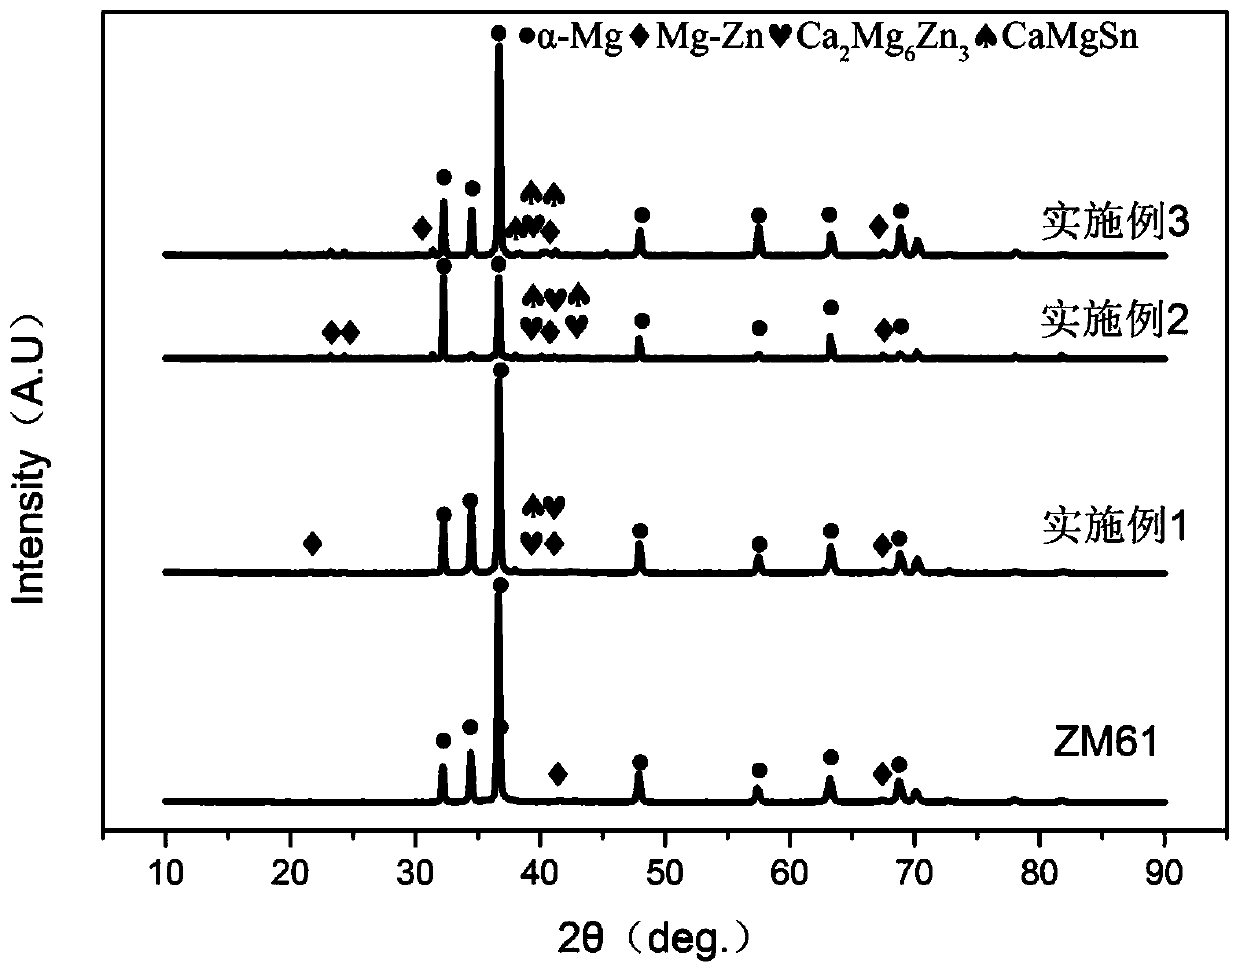 High-strength and high-plasticity magnesium zinc manganese tin calcium alloy and preparation method thereof